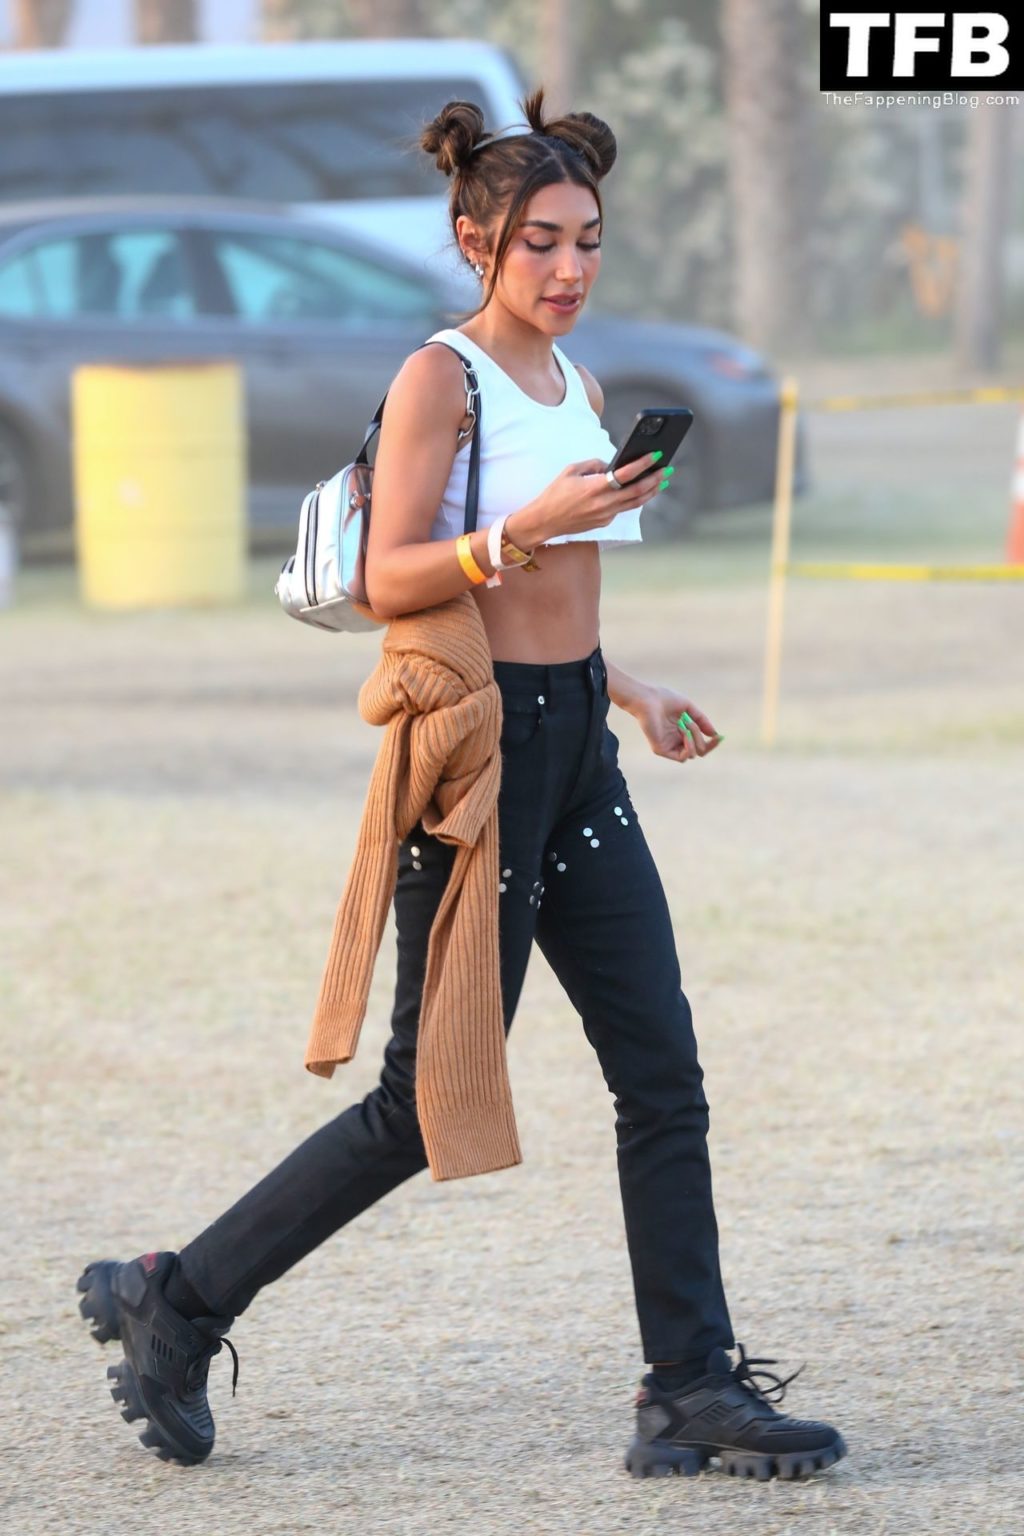 Chantel Jeffries Sexy The Fappening Blog 3 5 1024x1536 - Chantel Jeffries Shows Off Her Pokies & Sexy Waist While Hanging Out at Weekend 2 Day 3 of Coachella (10 Photos)